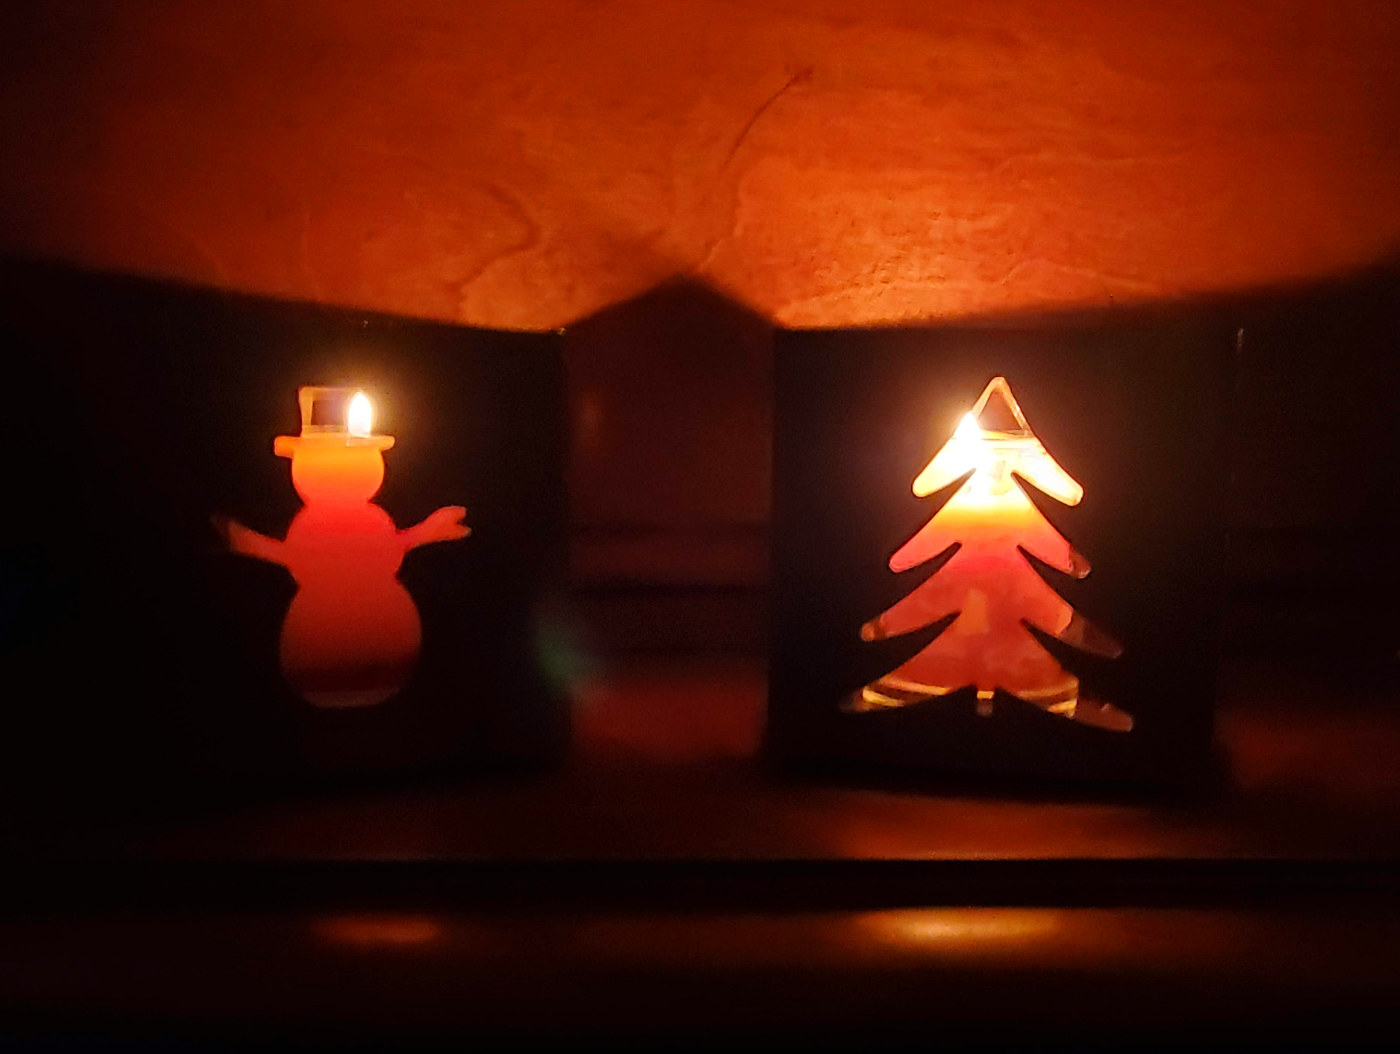 cutouts of a snowman and evergreen tree glow with orange-yellow light from candle flames